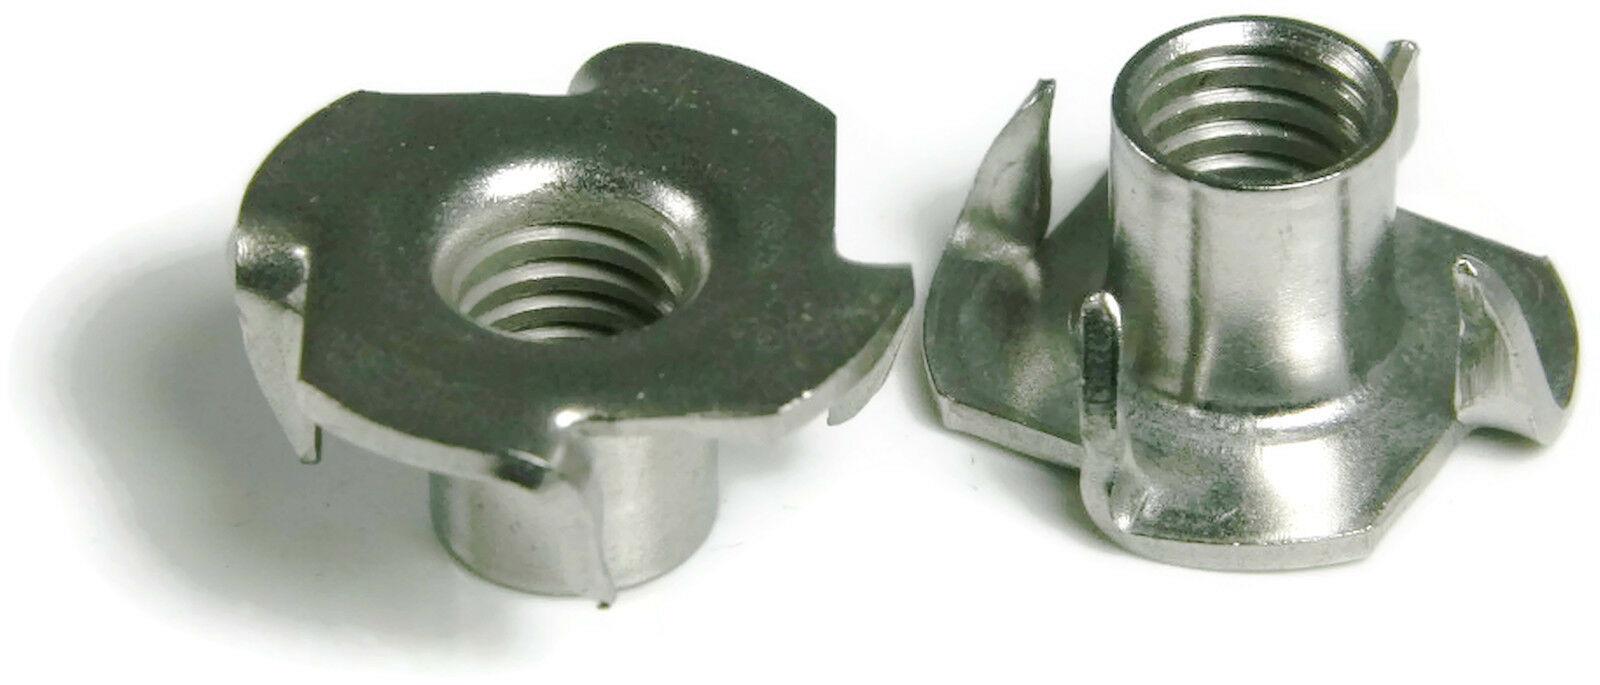 316 Stainless Steel T Nuts - All Sizes - Qty 25